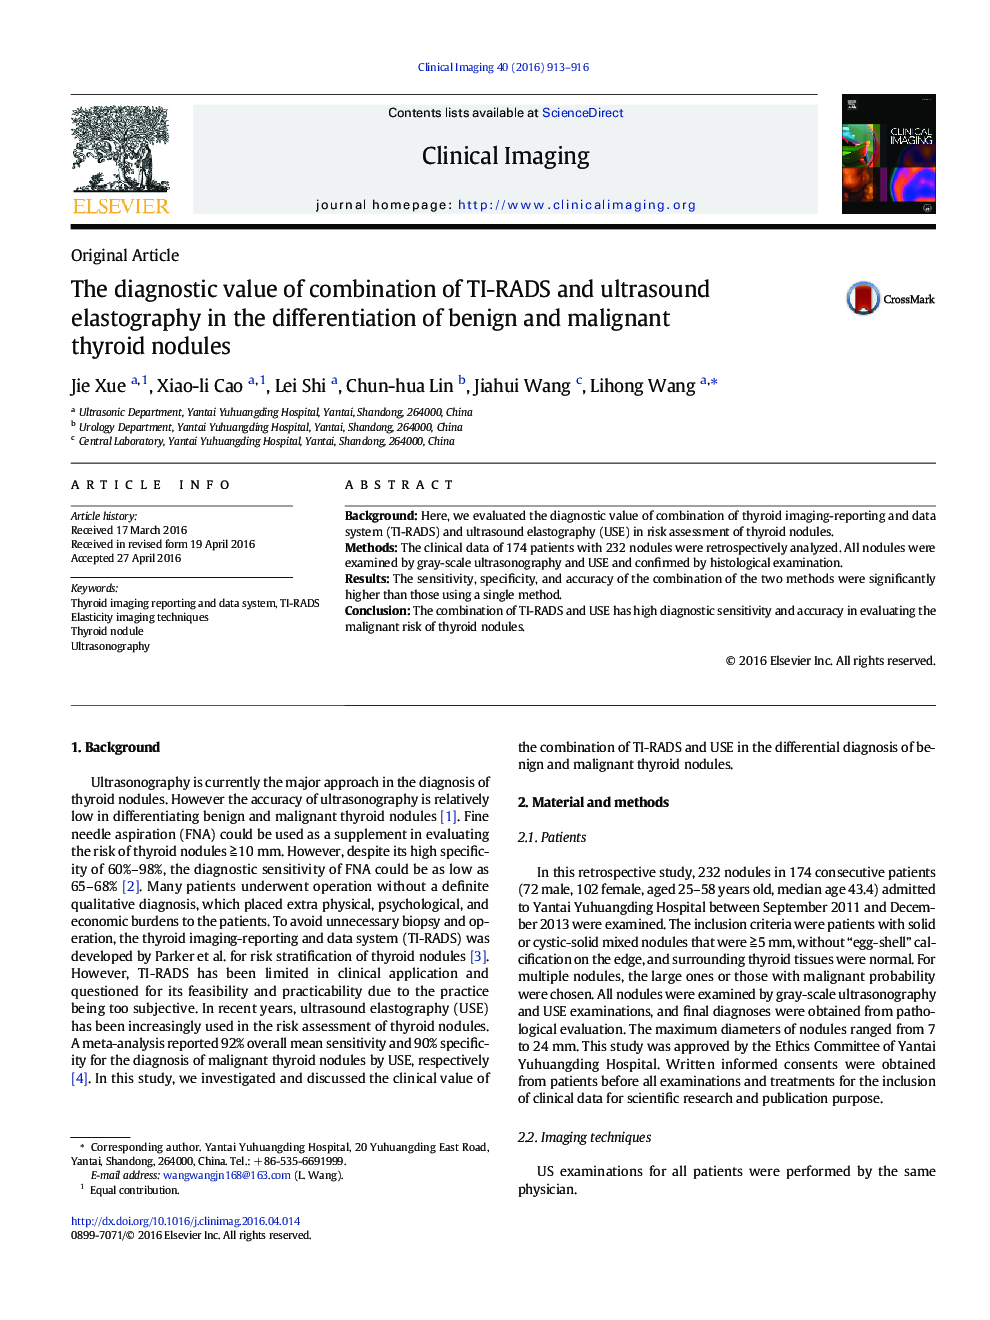 The diagnostic value of combination of TI-RADS and ultrasound elastography in the differentiation of benign and malignant thyroid nodules